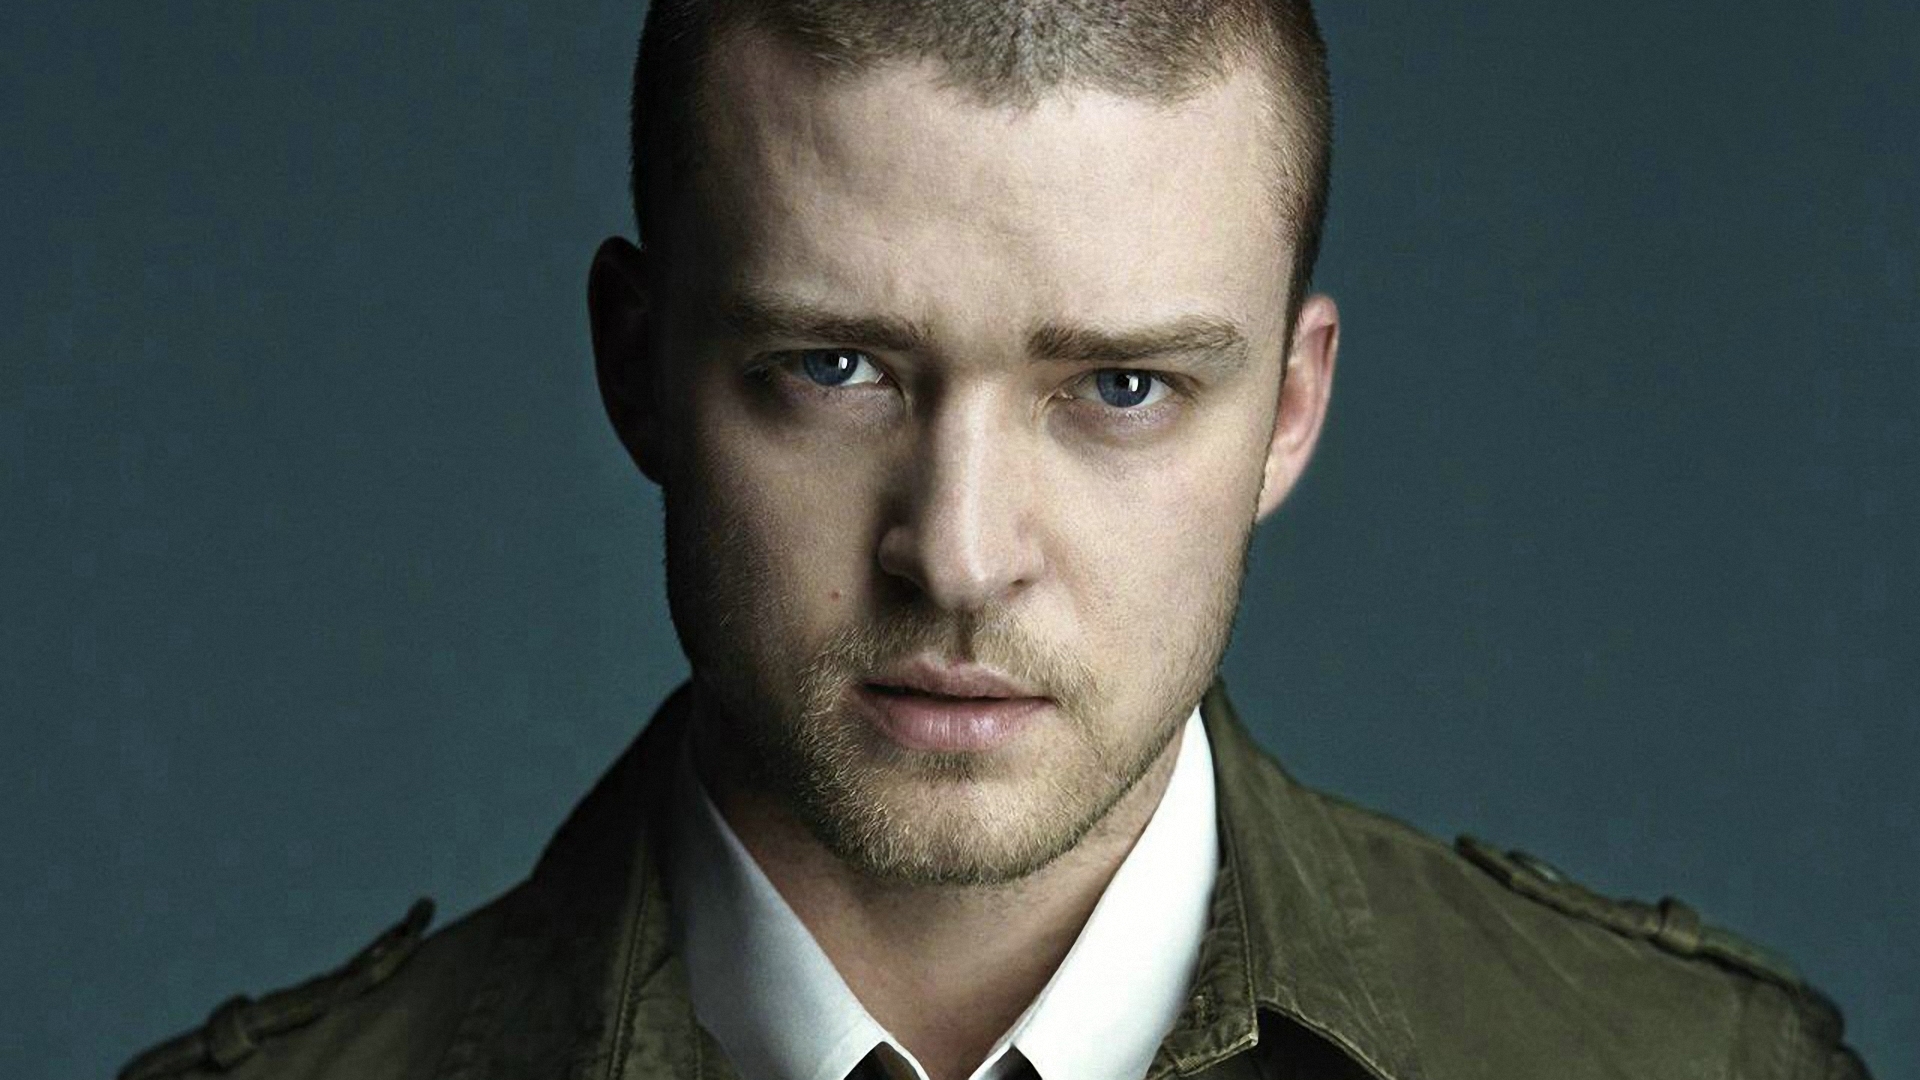 Justin timberlake wallpapers pictures images